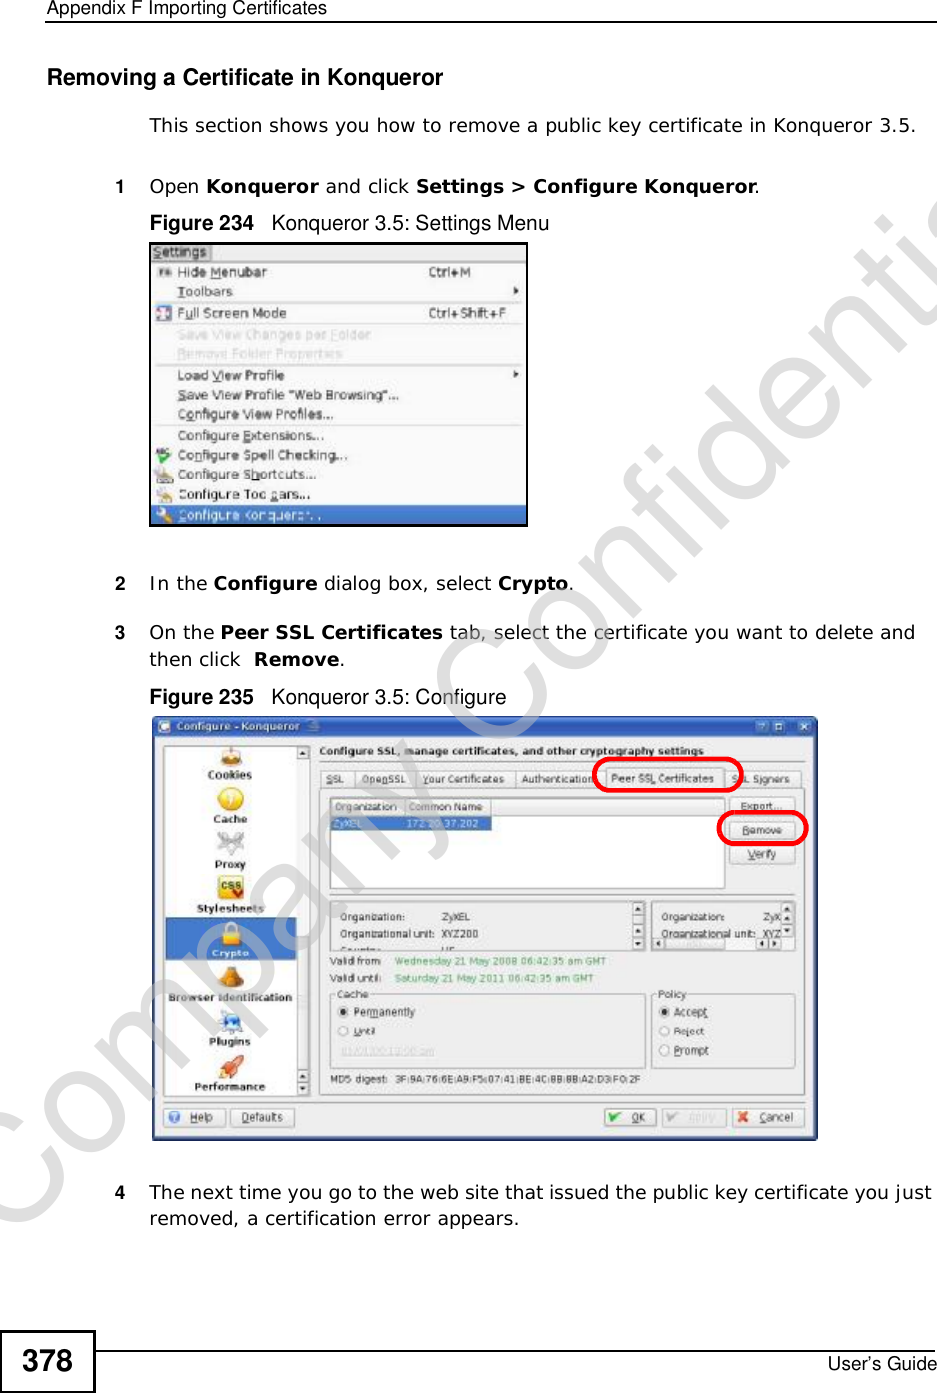 Appendix FImporting CertificatesUser’s Guide378Removing a Certificate in KonquerorThis section shows you how to remove a public key certificate in Konqueror 3.5.1Open Konqueror and click Settings &gt; Configure Konqueror.Figure 234   Konqueror 3.5: Settings Menu2In the Configure dialog box, select Crypto.3On the Peer SSL Certificates tab, select the certificate you want to delete and then click  Remove.Figure 235   Konqueror 3.5: Configure4The next time you go to the web site that issued the public key certificate you just removed, a certification error appears.Company Confidential